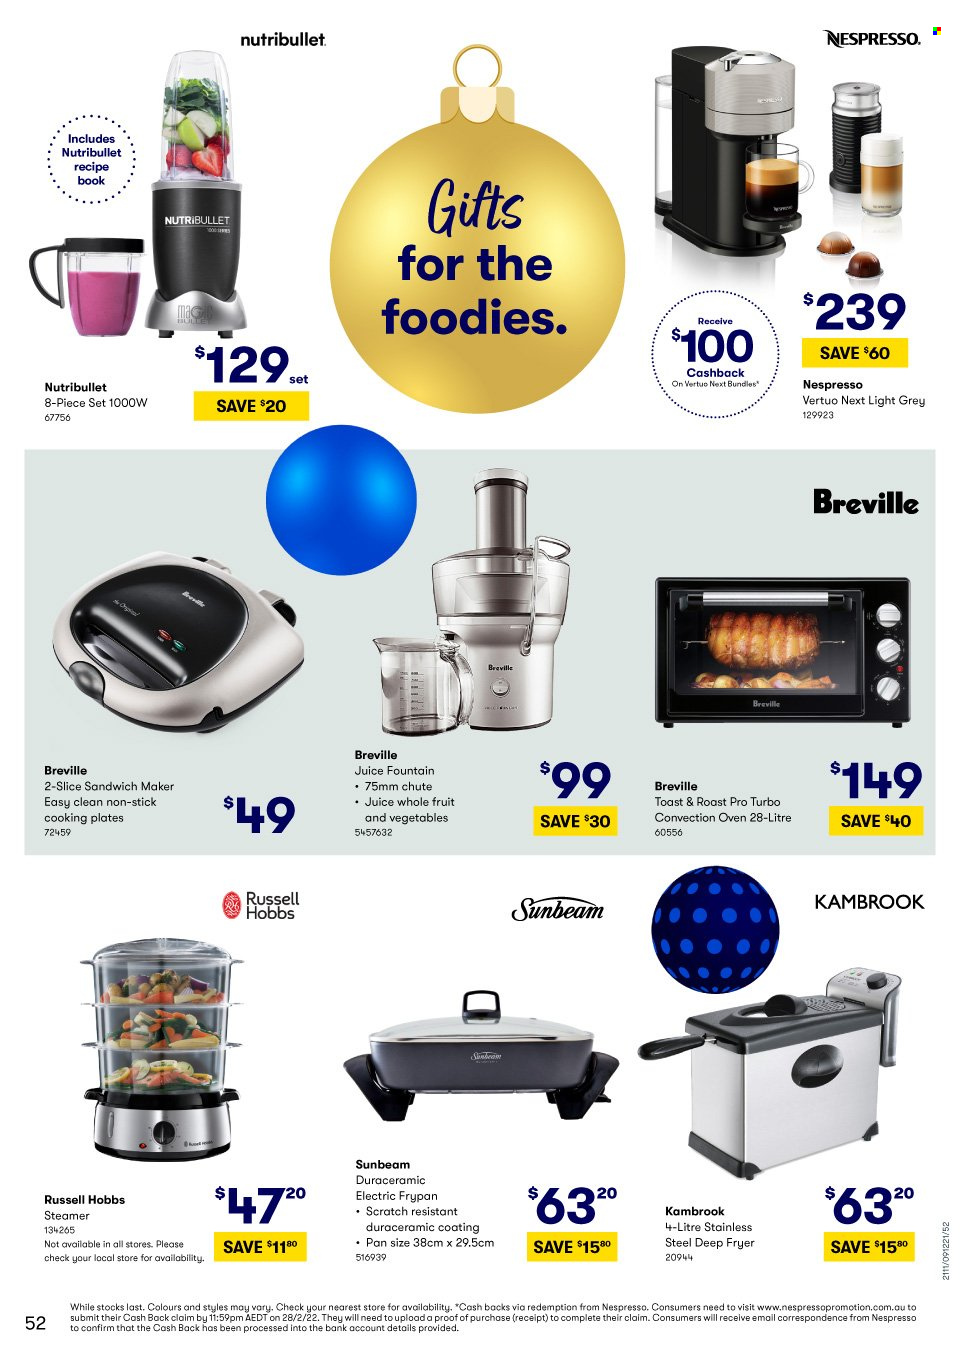 thumbnail - BIG W Catalogue - Sales products - plate, pan, frying pan, book, Sunbeam, oven, convection oven, Nespresso, Kambrook, deep fryer, NutriBullet, Russell Hobbs, electric frypan, sandwich maker. Page 52.